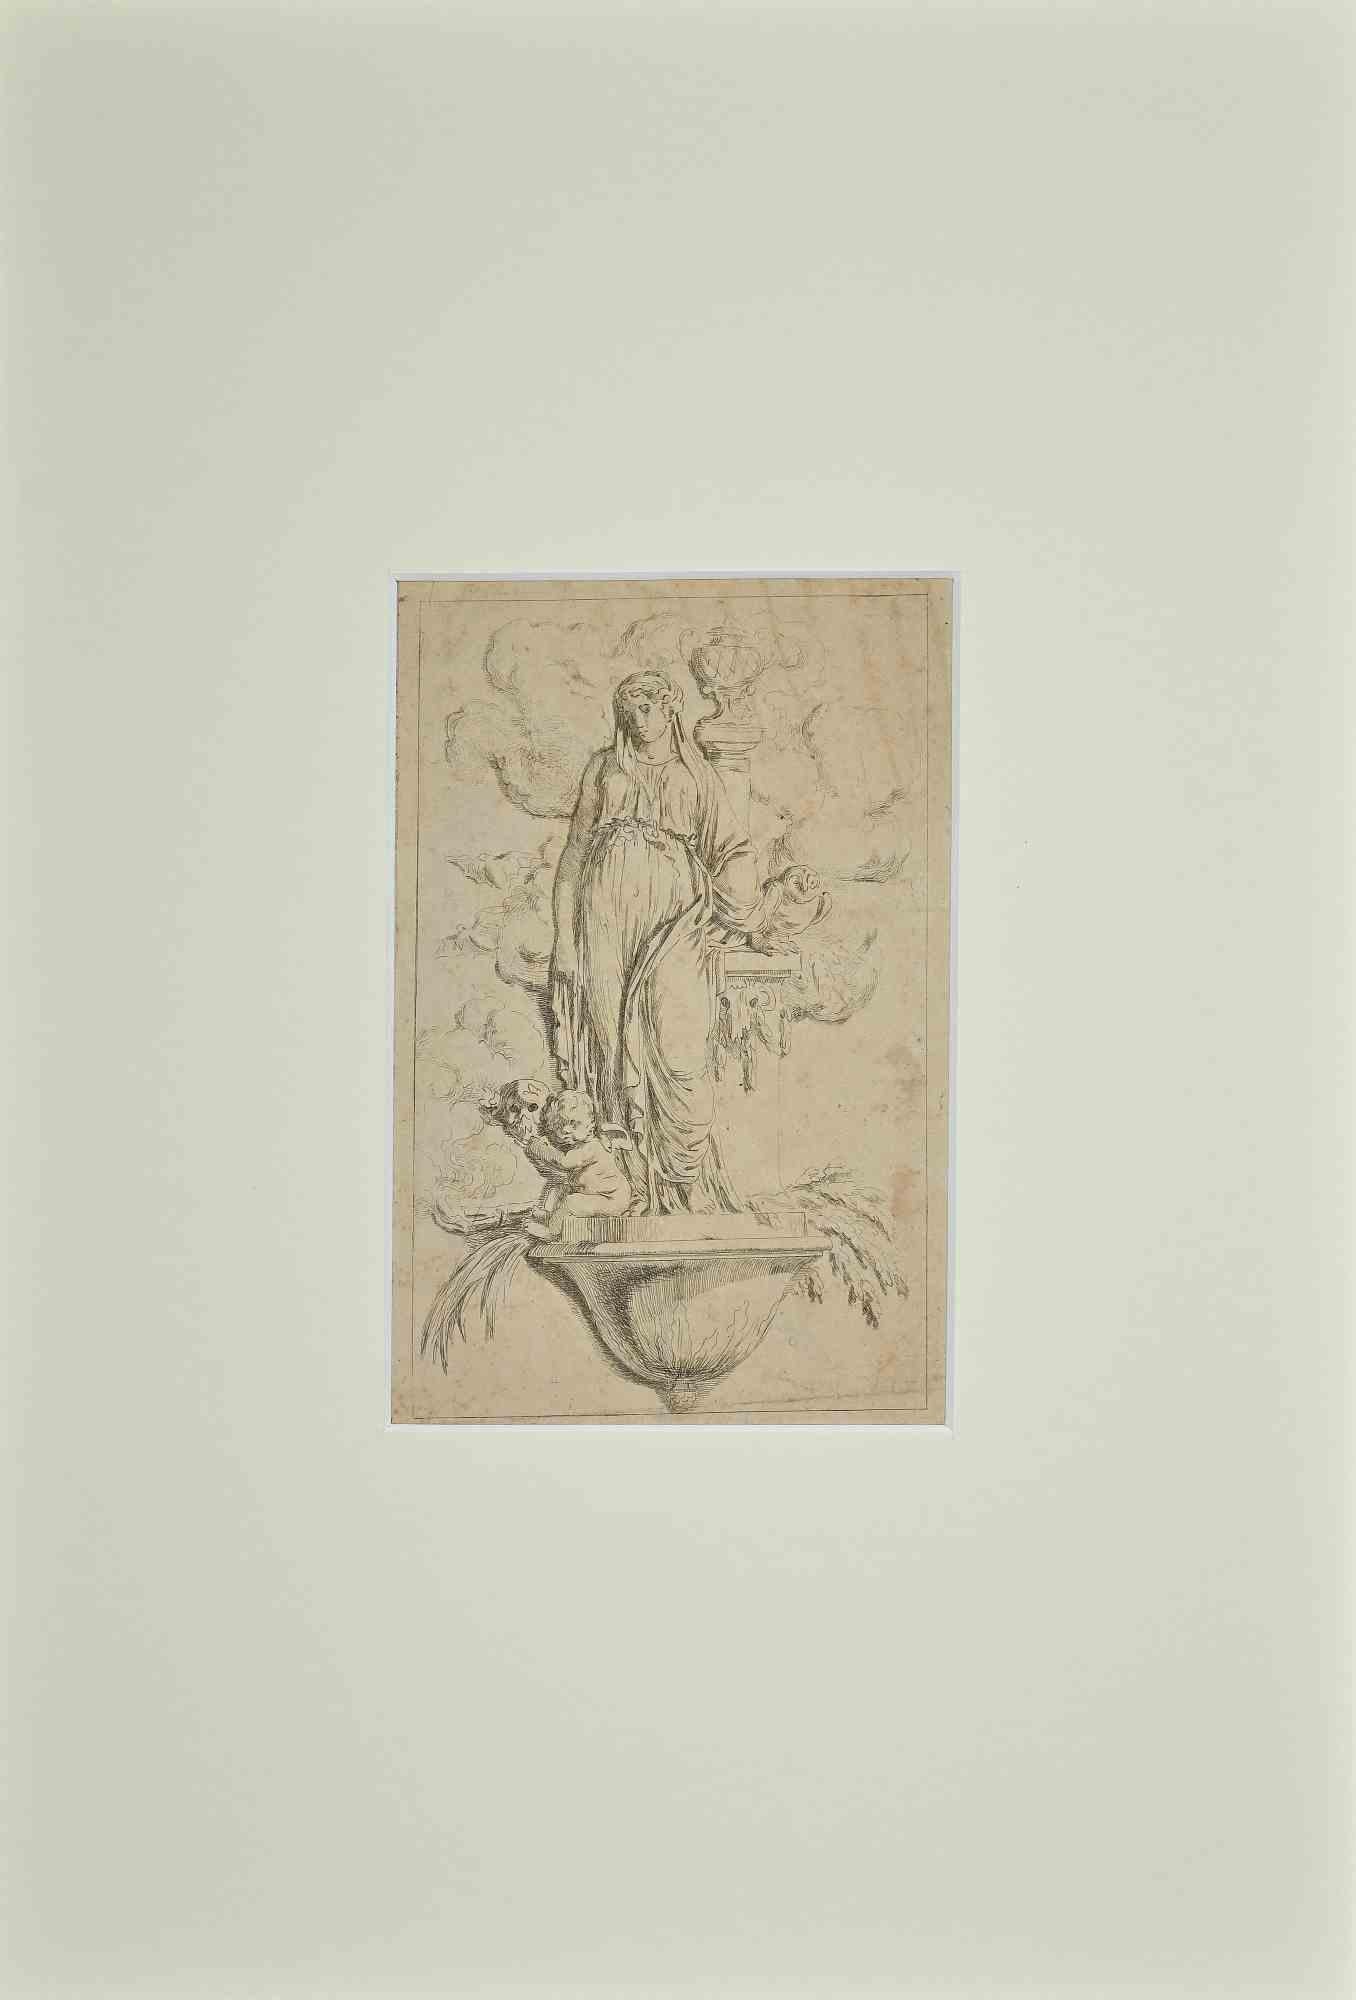 Unknown Figurative Art - Study for a Frieze - Original Pen Drawing - 18th Century